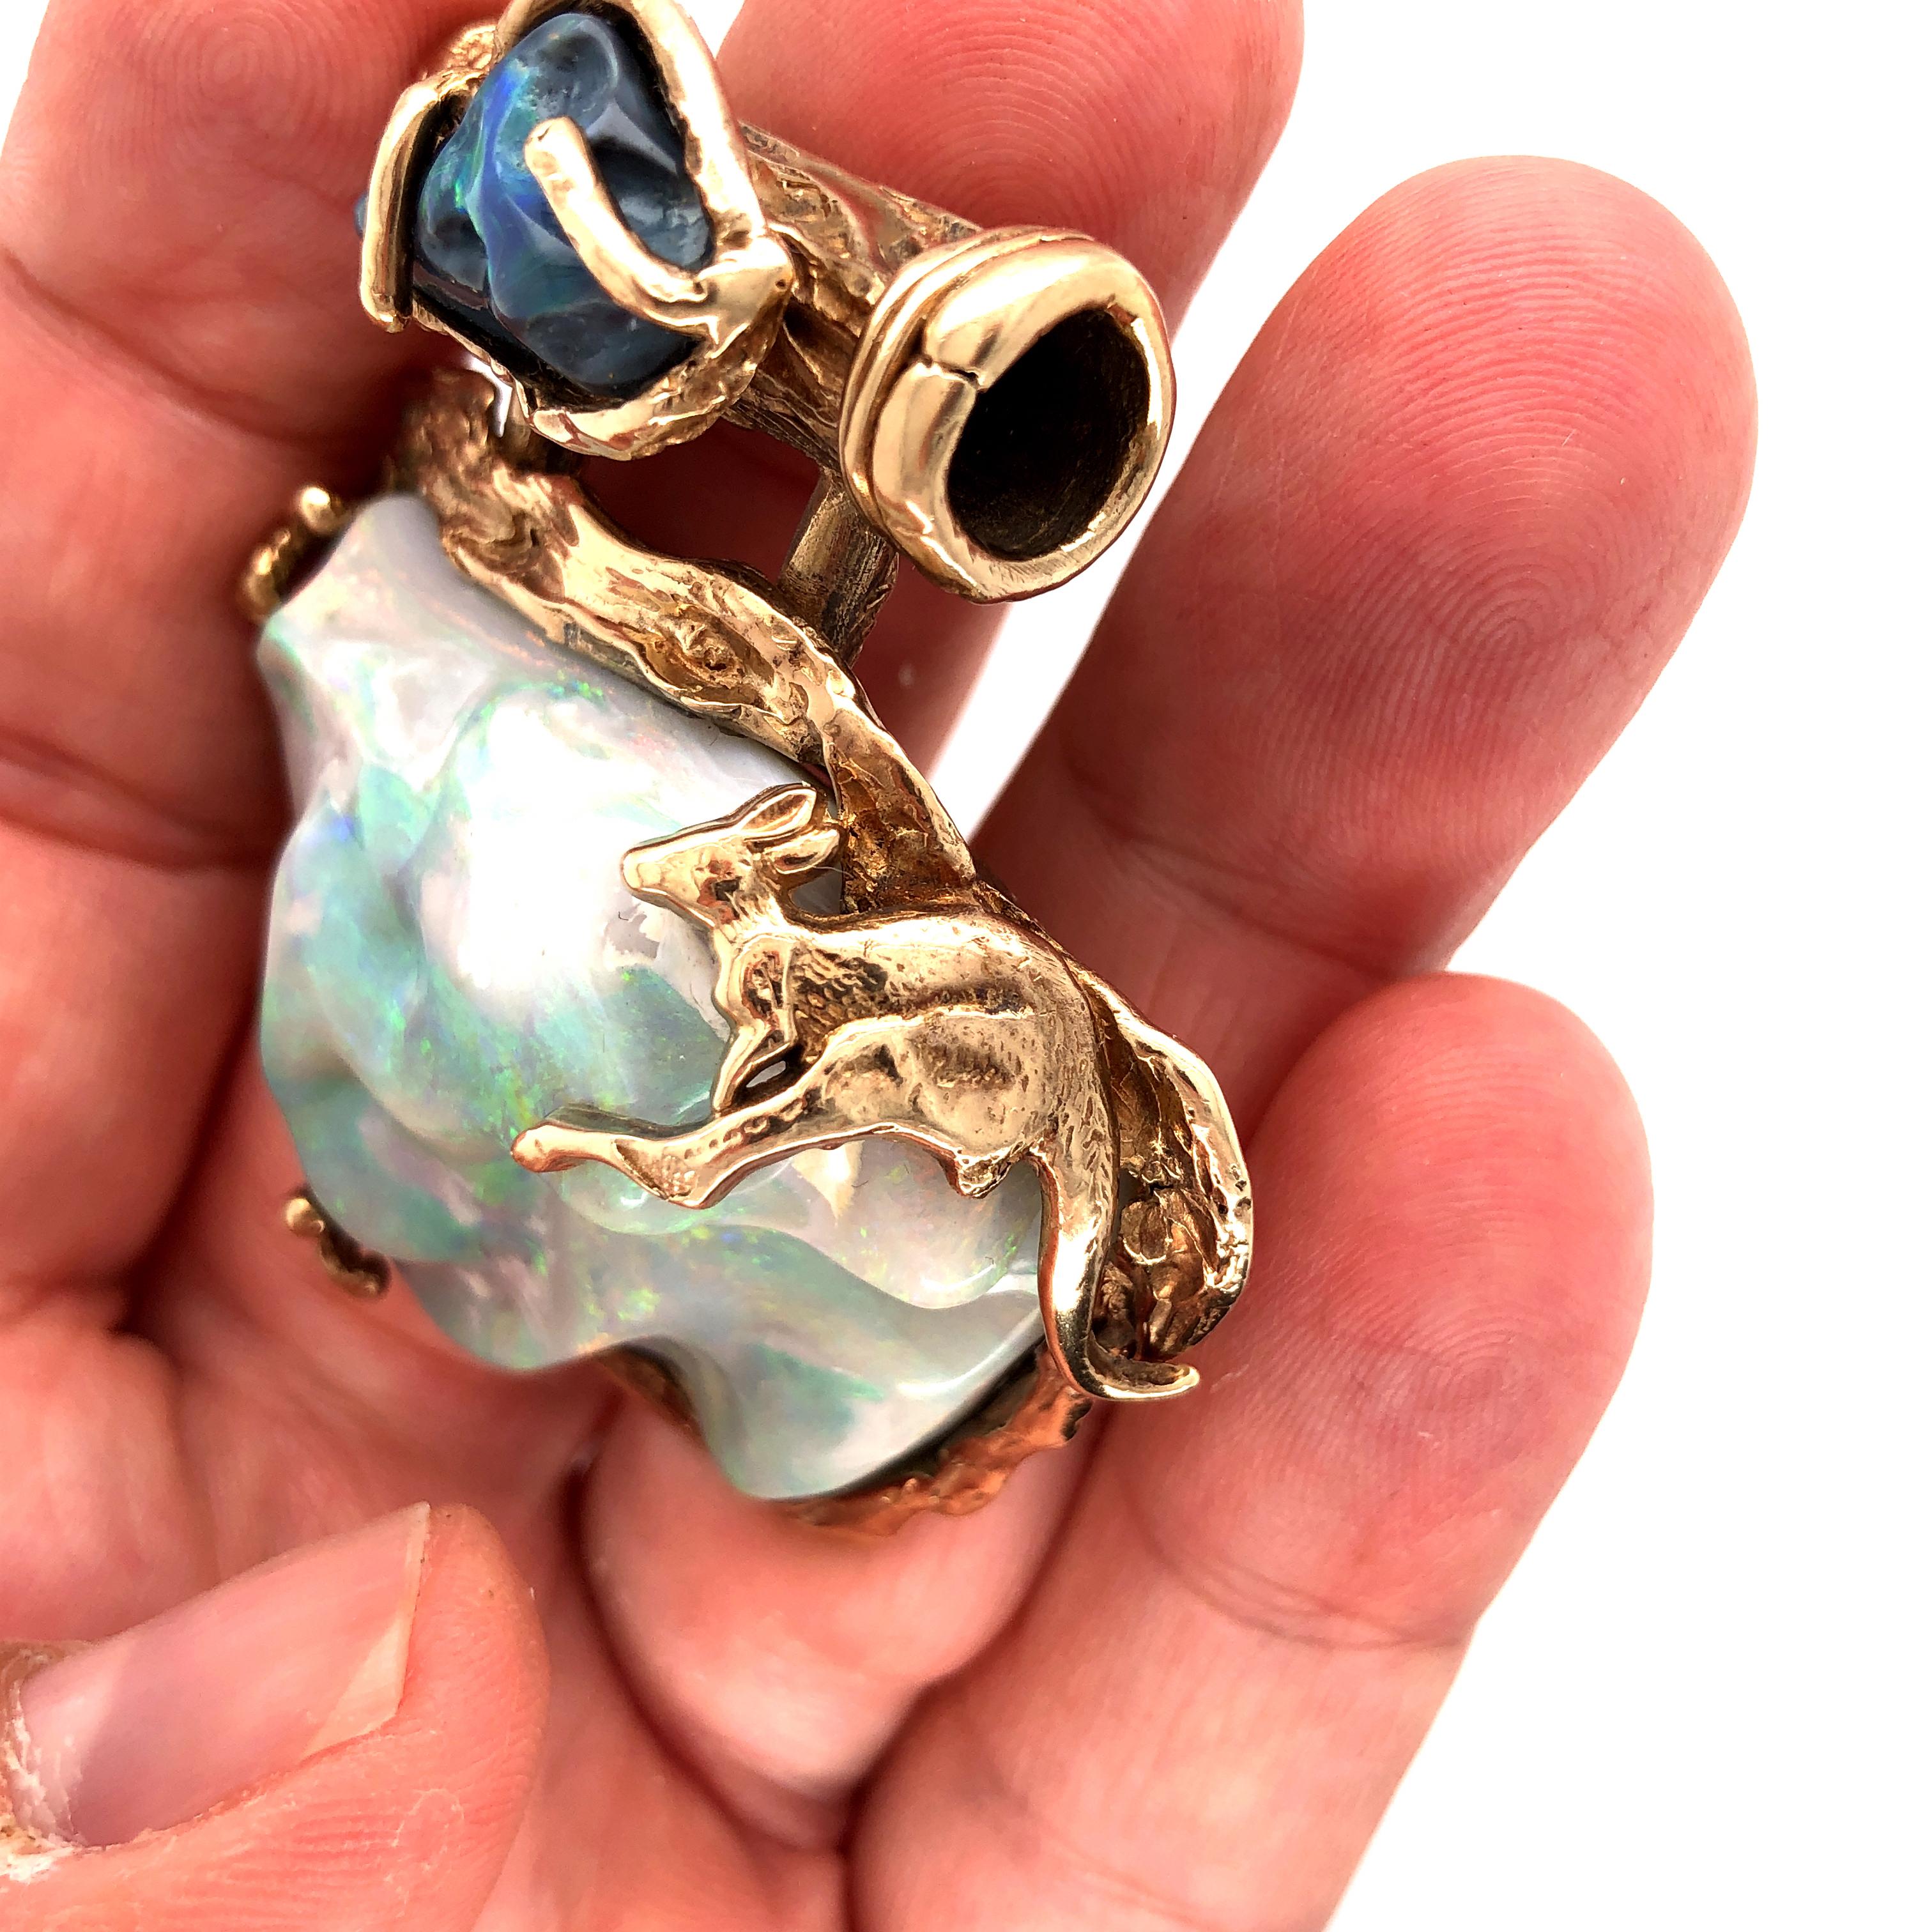 Offered here is a unique size and shape Australian Opal set in 14kt gold pendant. This pendant is truly one of a kind. The pendant has a large off shape natural Opal set with prong setting with a kangaroo on the top right, plus you have an off shape